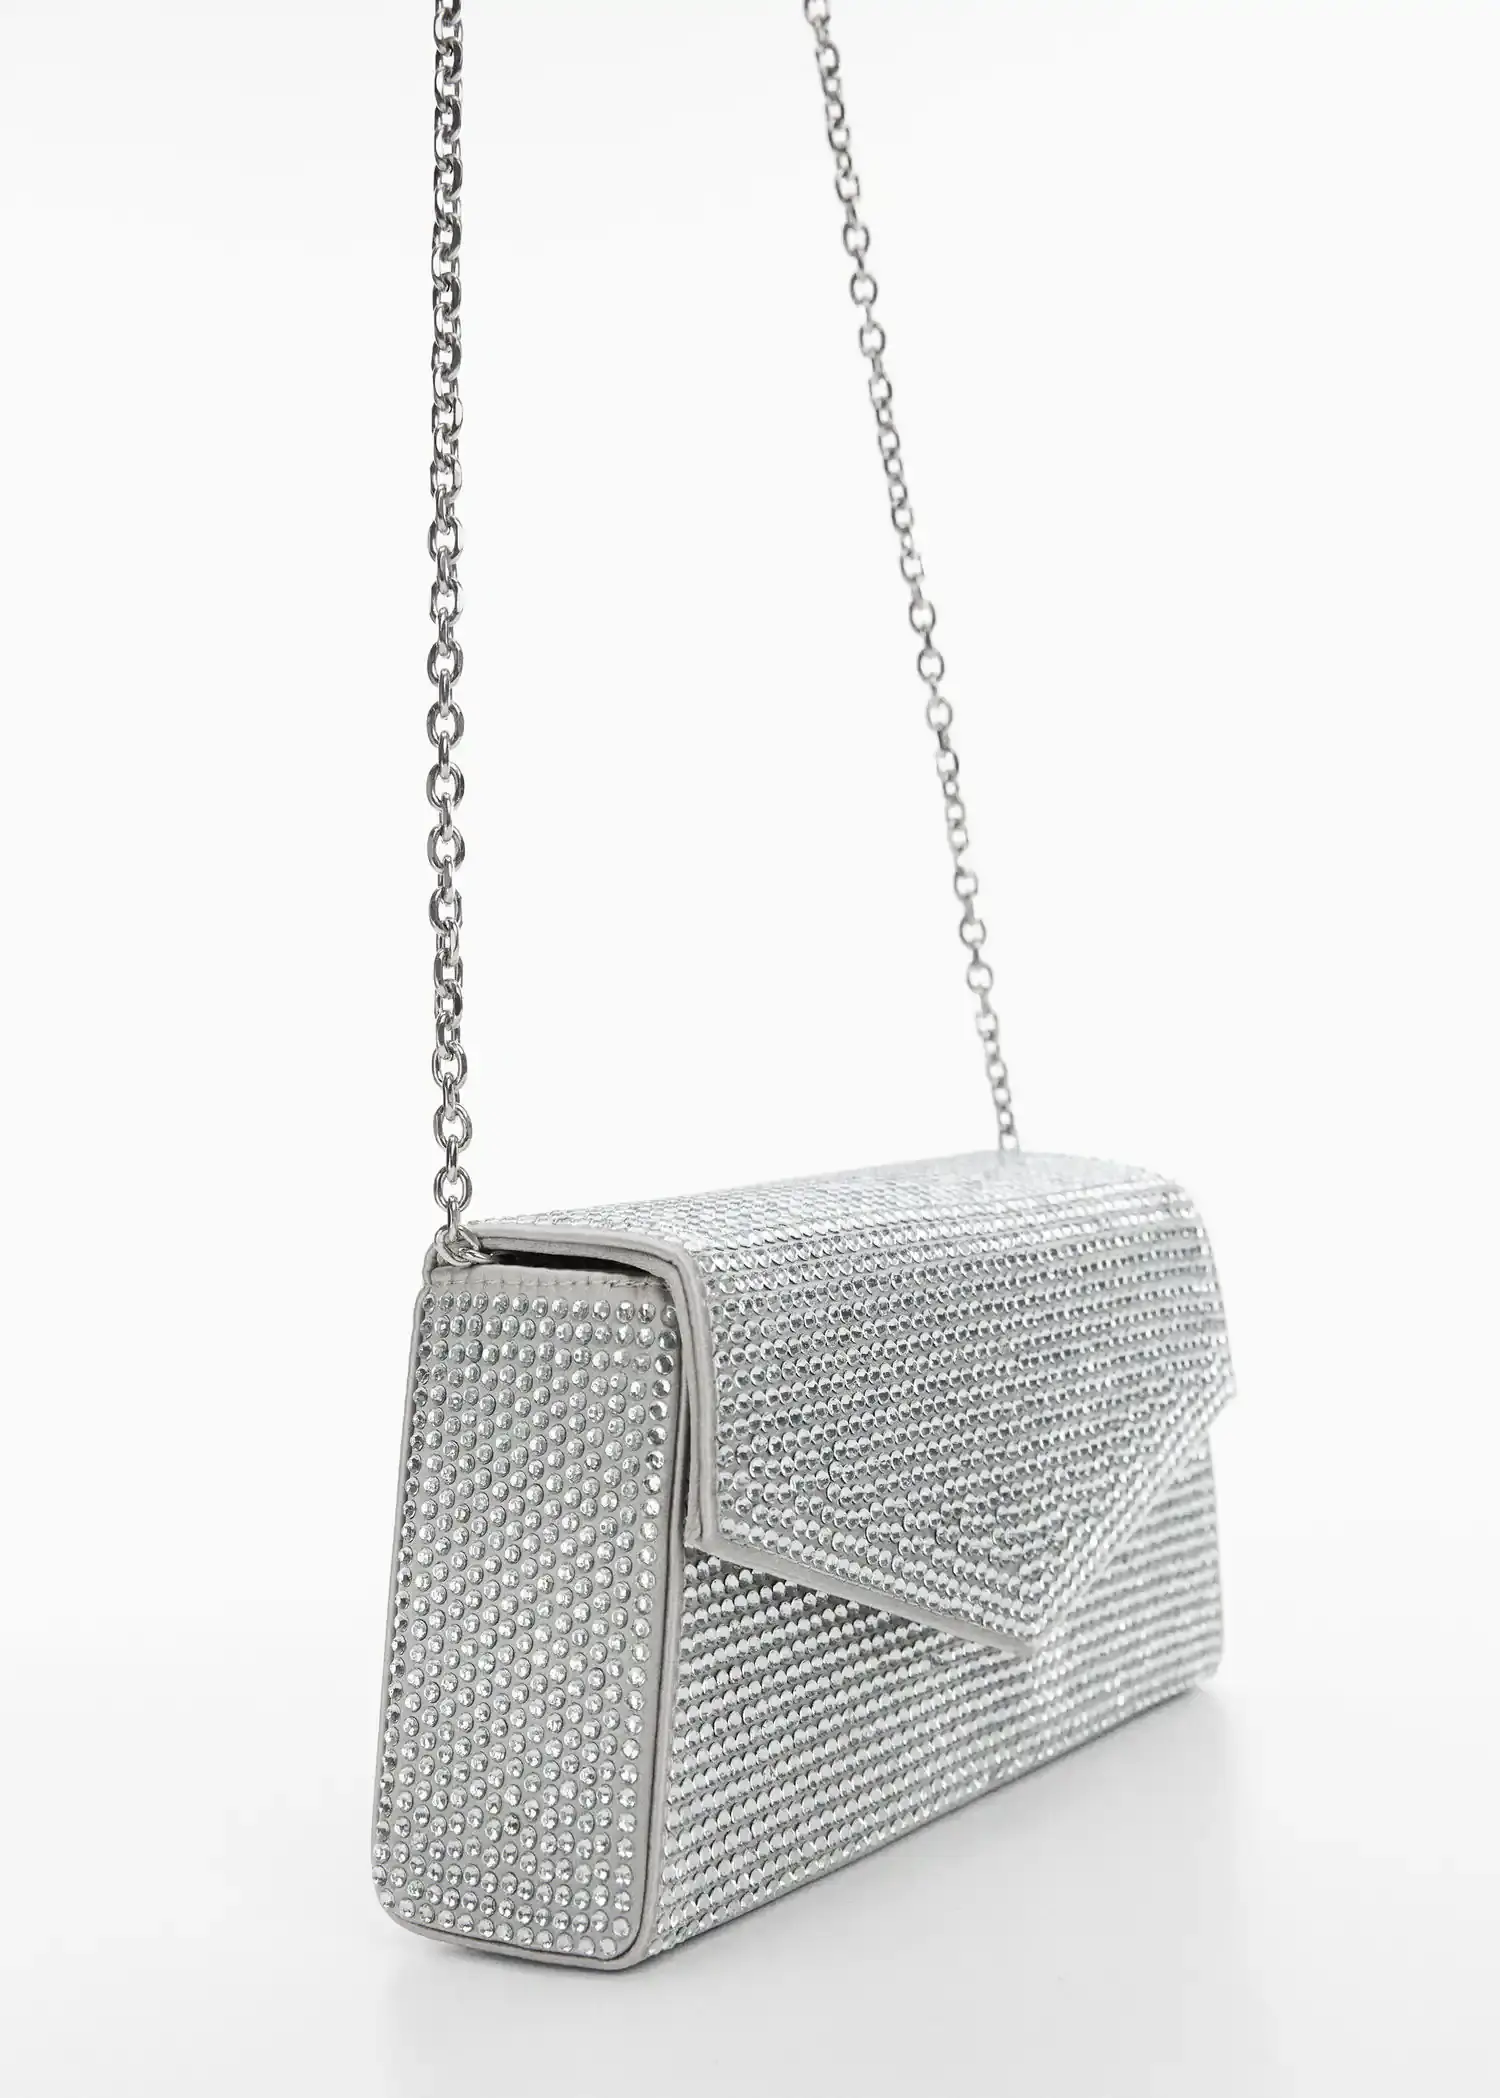 Mango Chain bag with crystals. a close up of a purse on a white surface 